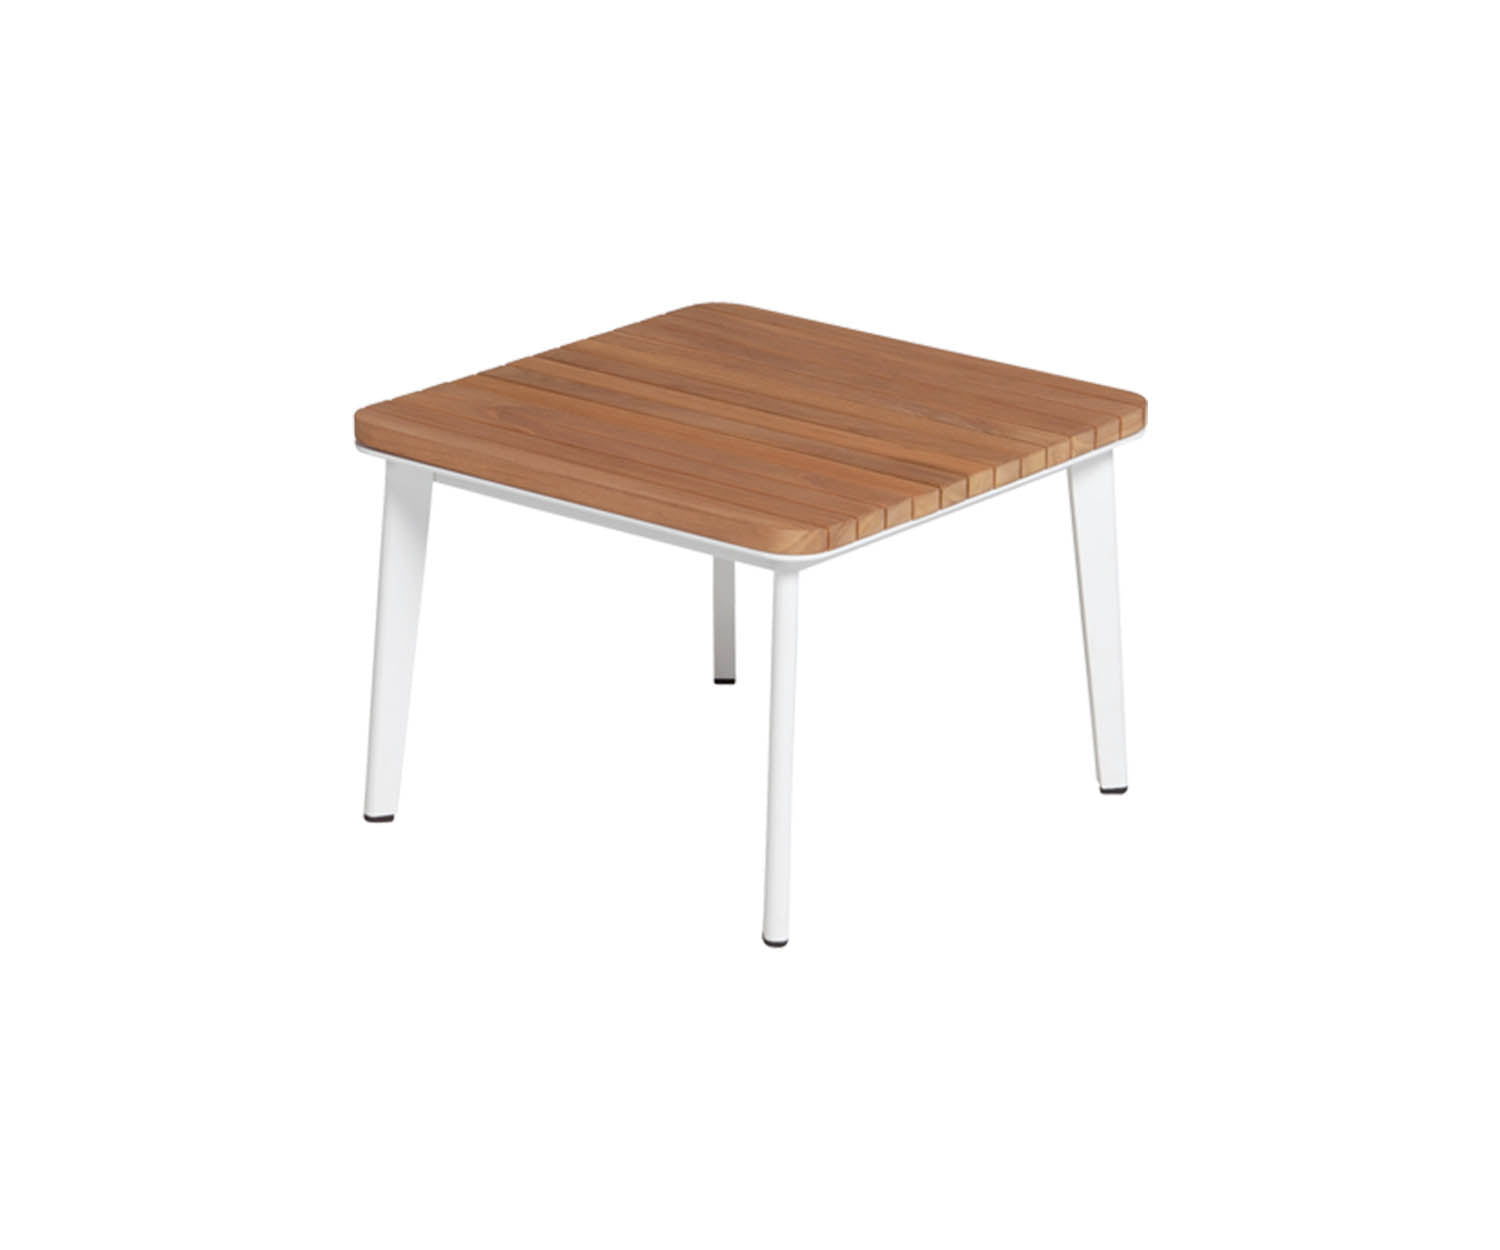 Triconfort, Riba 40710 Side Table